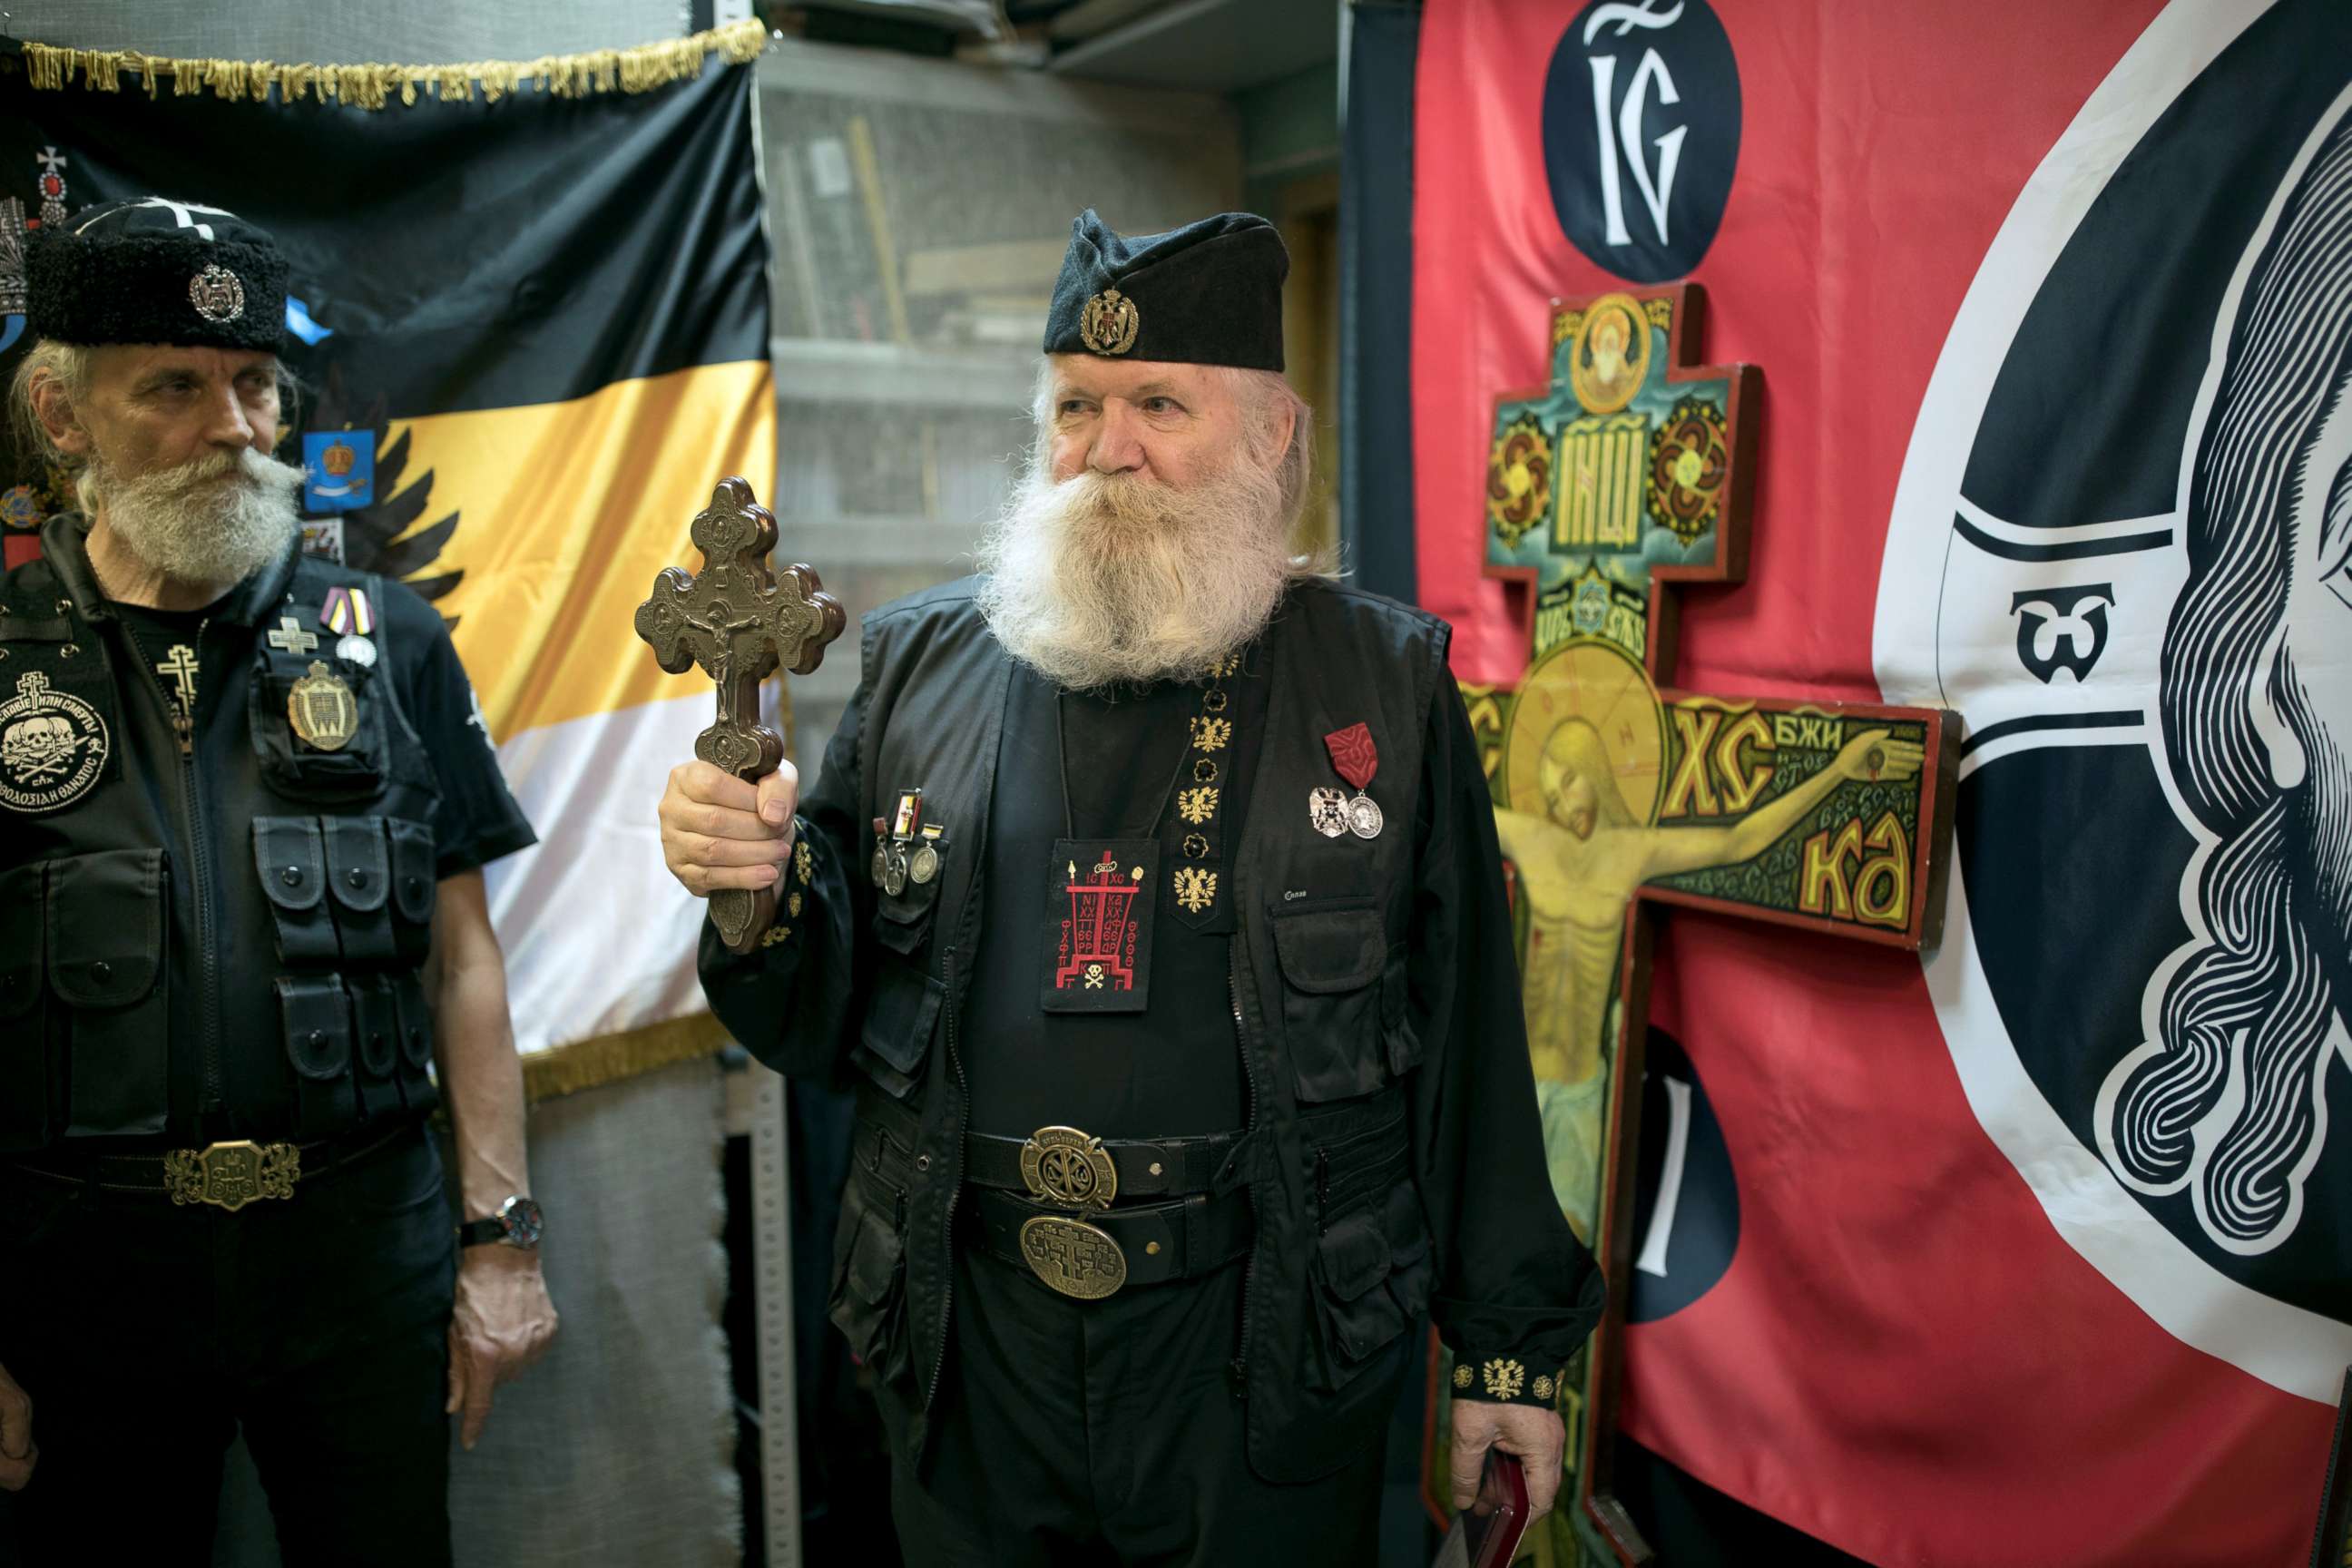 PHOTO: Leonid Simonovich-Nikshich, right, head of the Union of Orthodox Banner-Bearers, and Igor Miroshnichenko, his deputy, prepare for the award ceremony at their headquarters in Moscow, July 12, 2018.